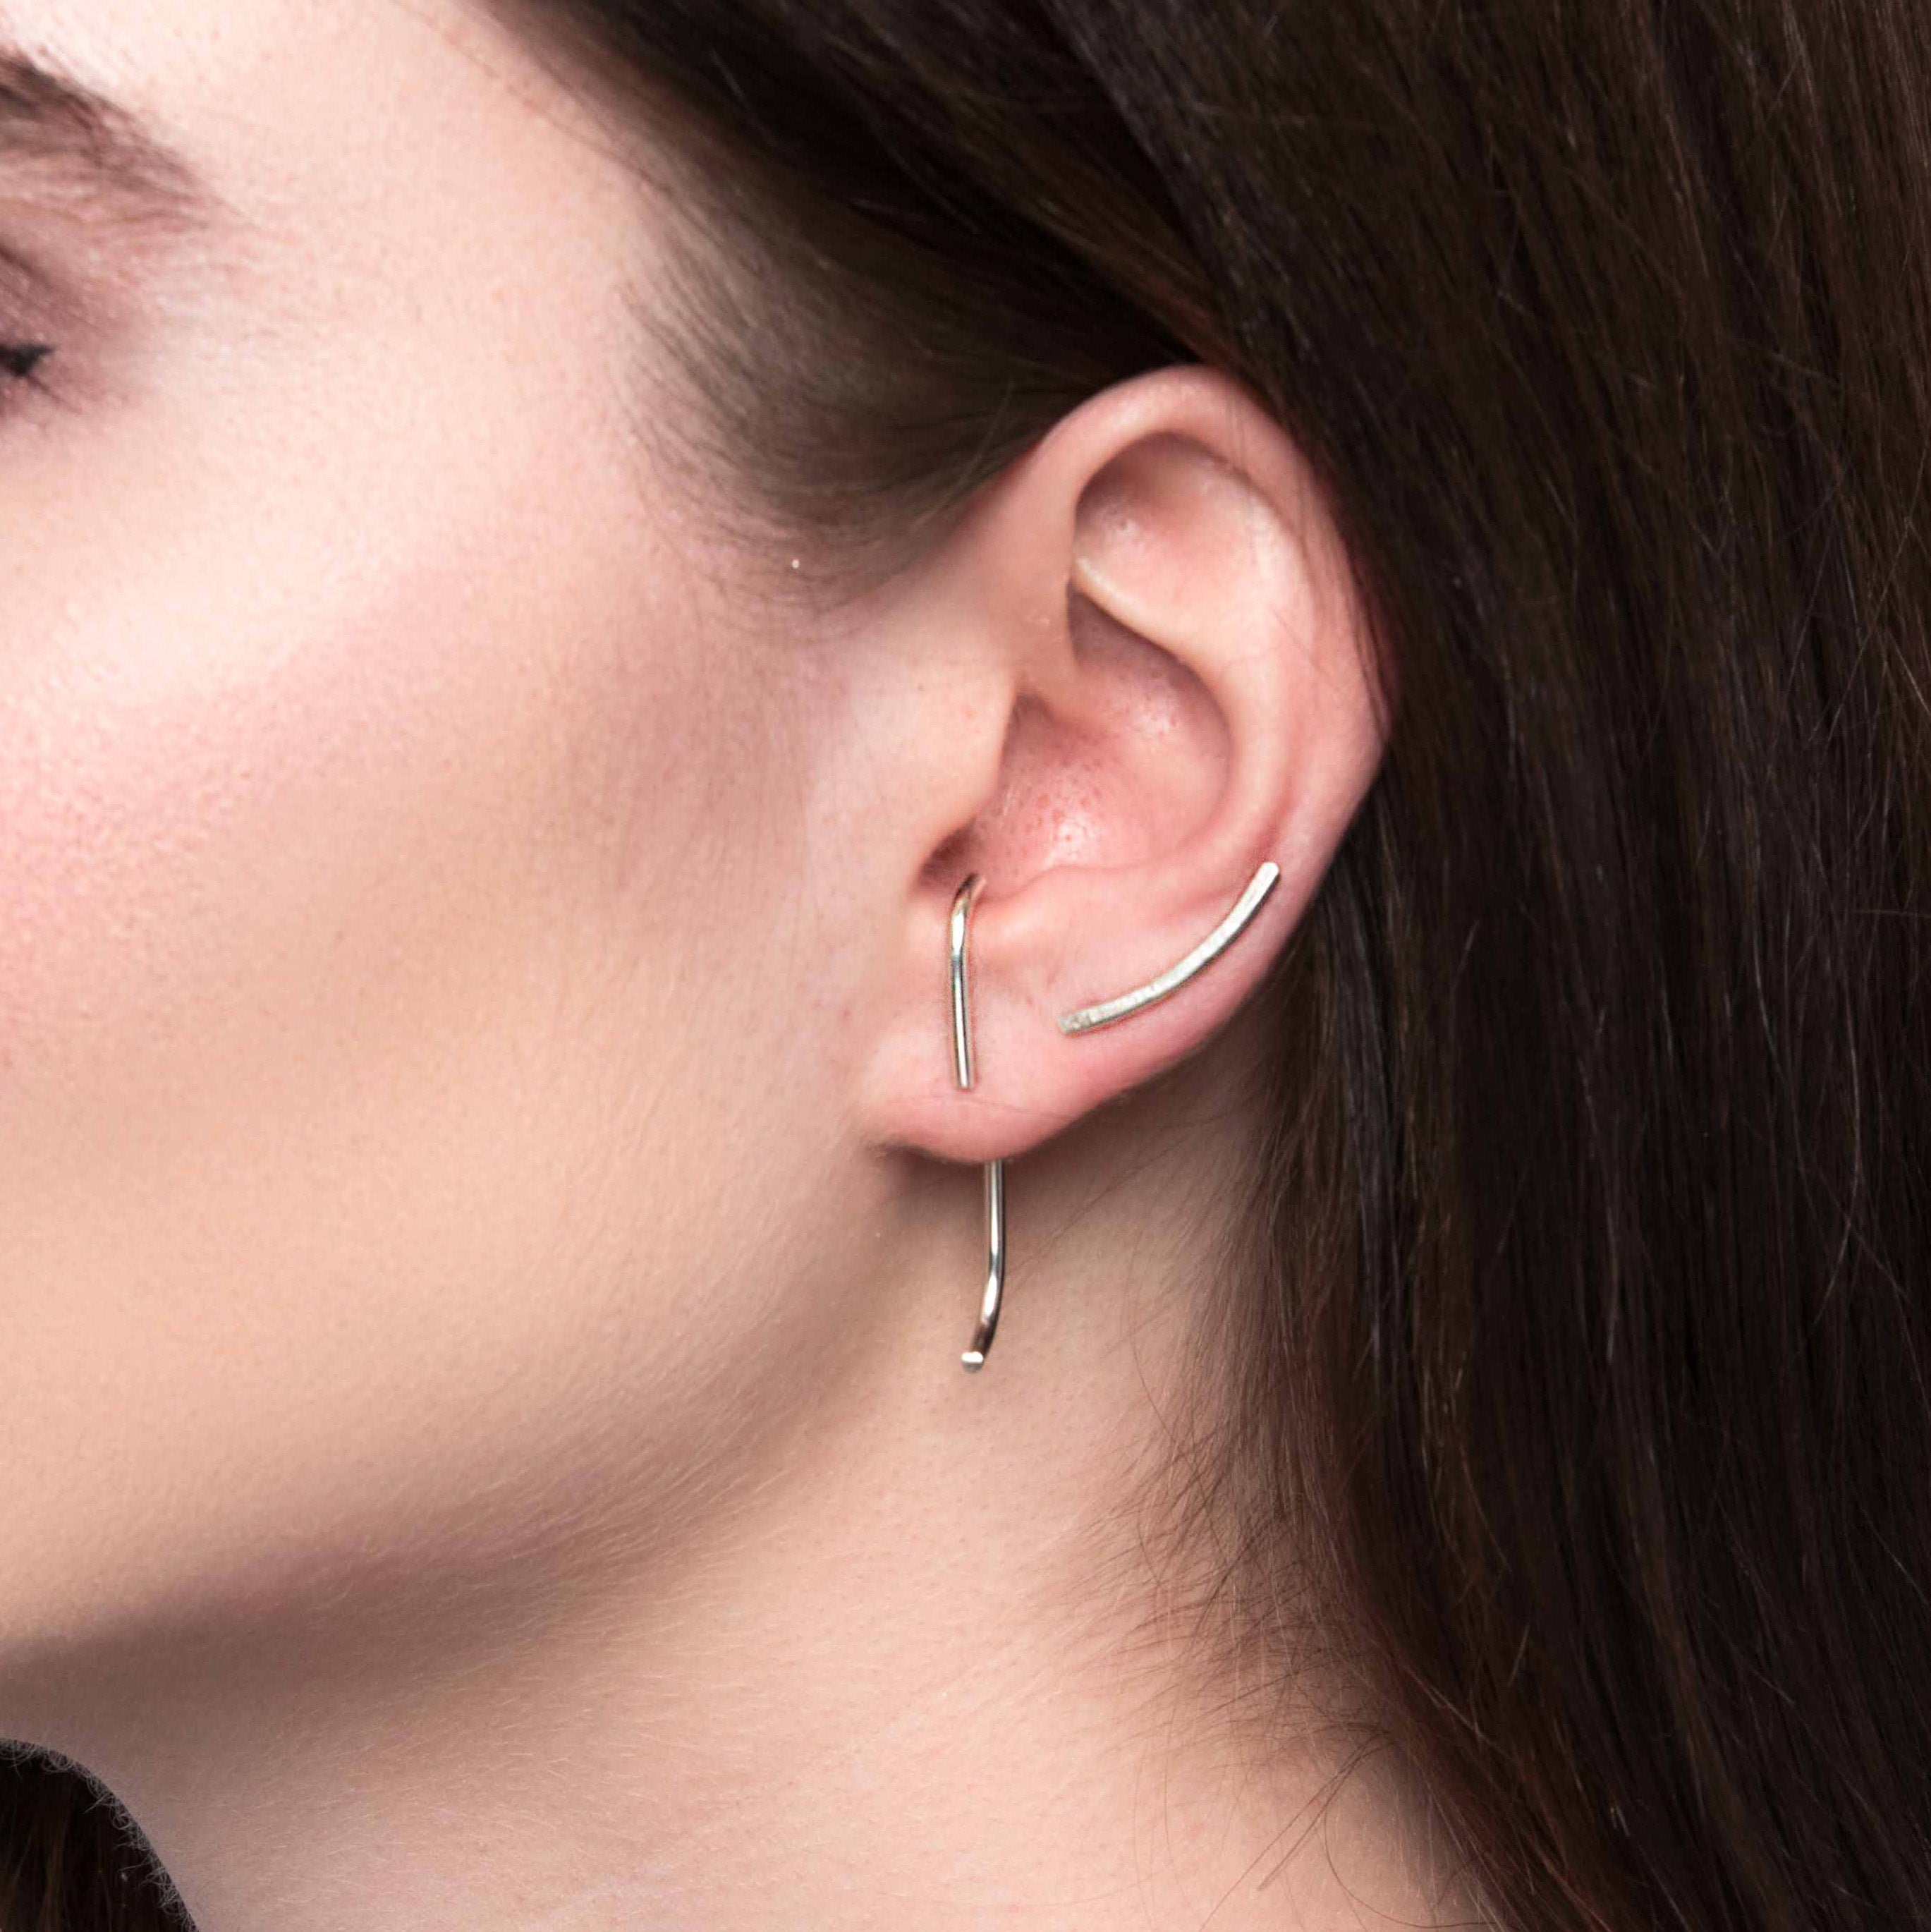 Suspension Ear Cuff, Gold, Rose Gold, or Silver | Glamrocks Jewelry